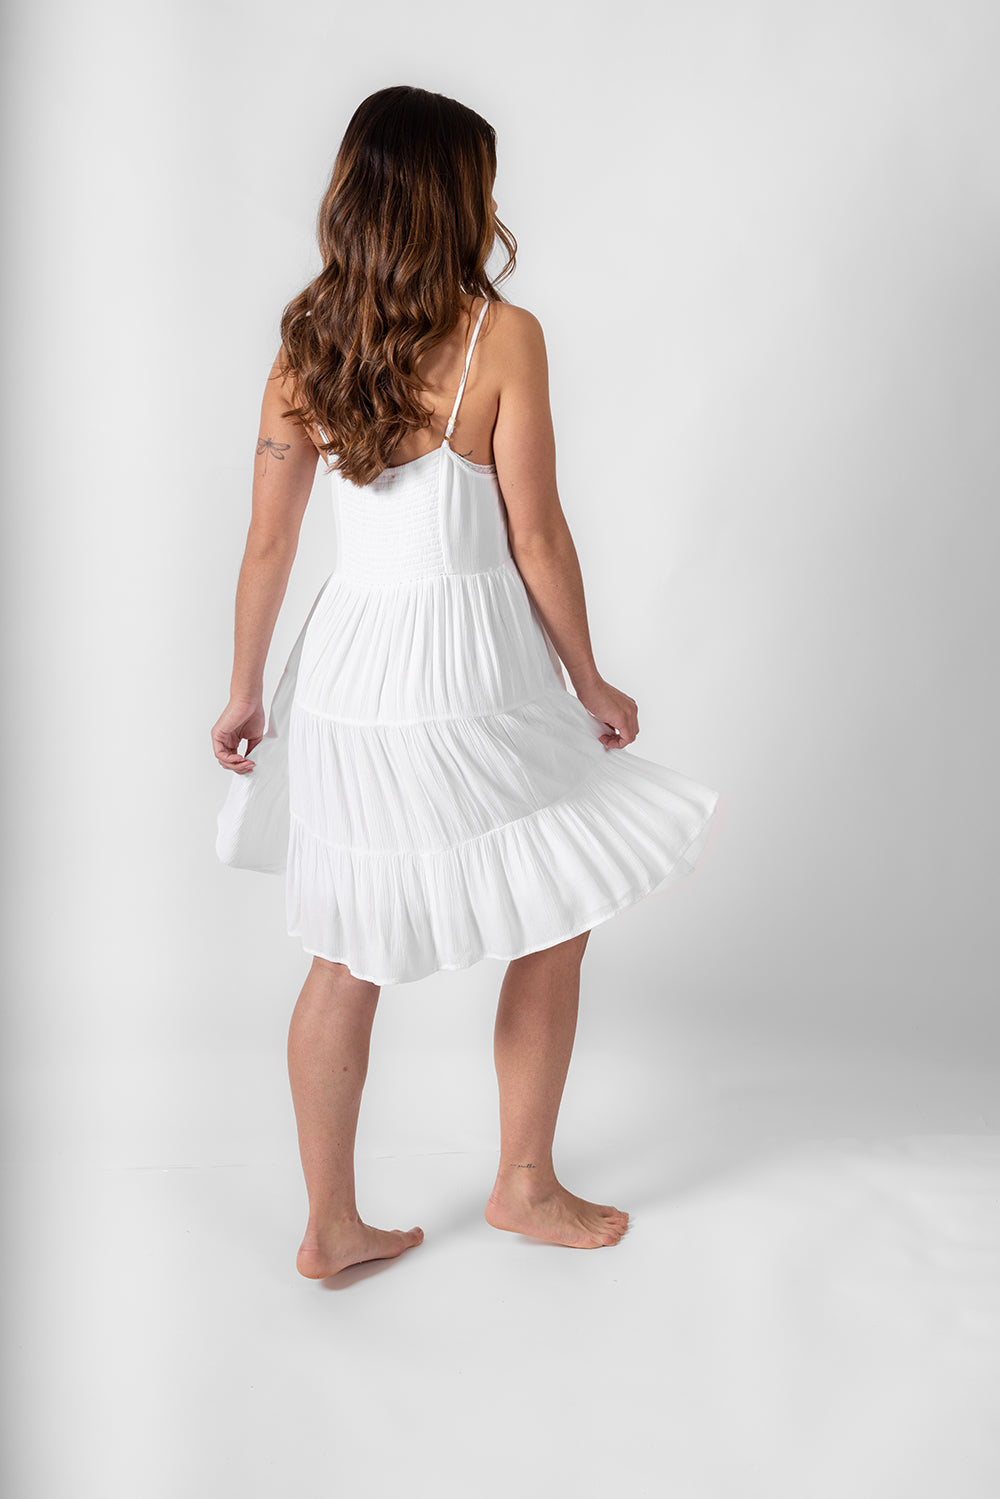 the back of a bruntte hair woman model wearing a white strappy beach dress